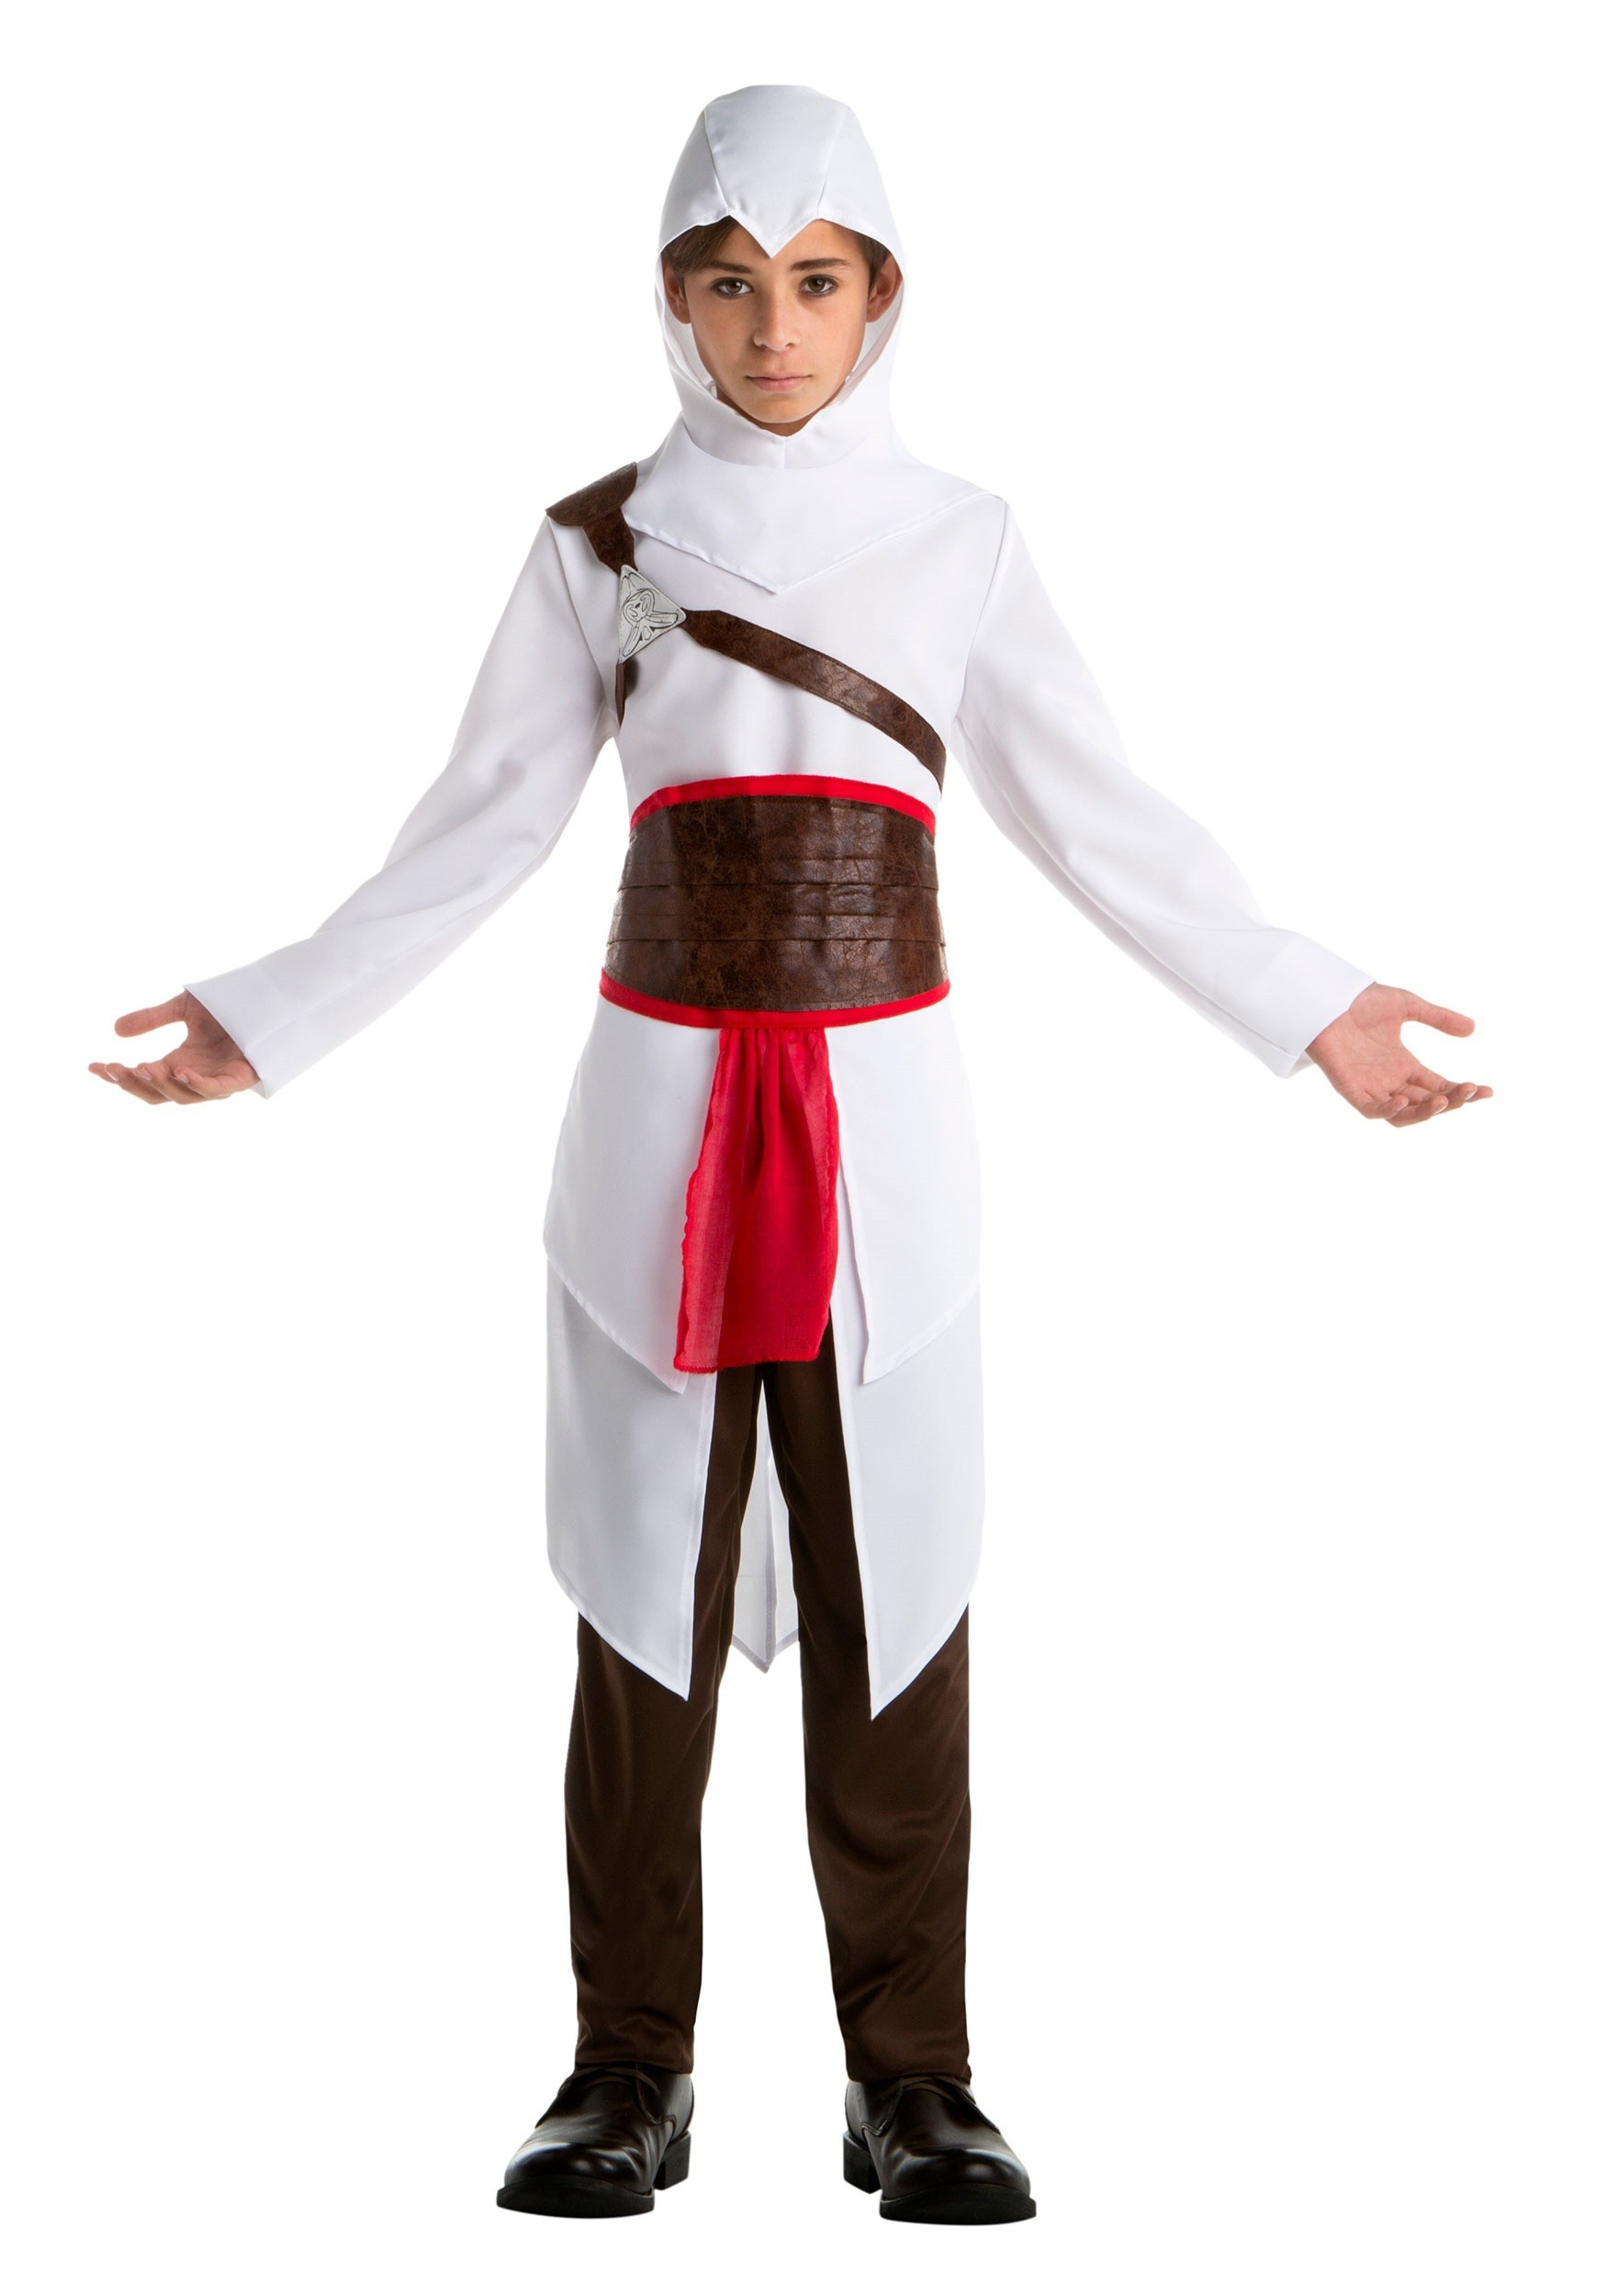 DIY Assassins Creed Costume
 Assassin s Creed Altair Costume for Teens